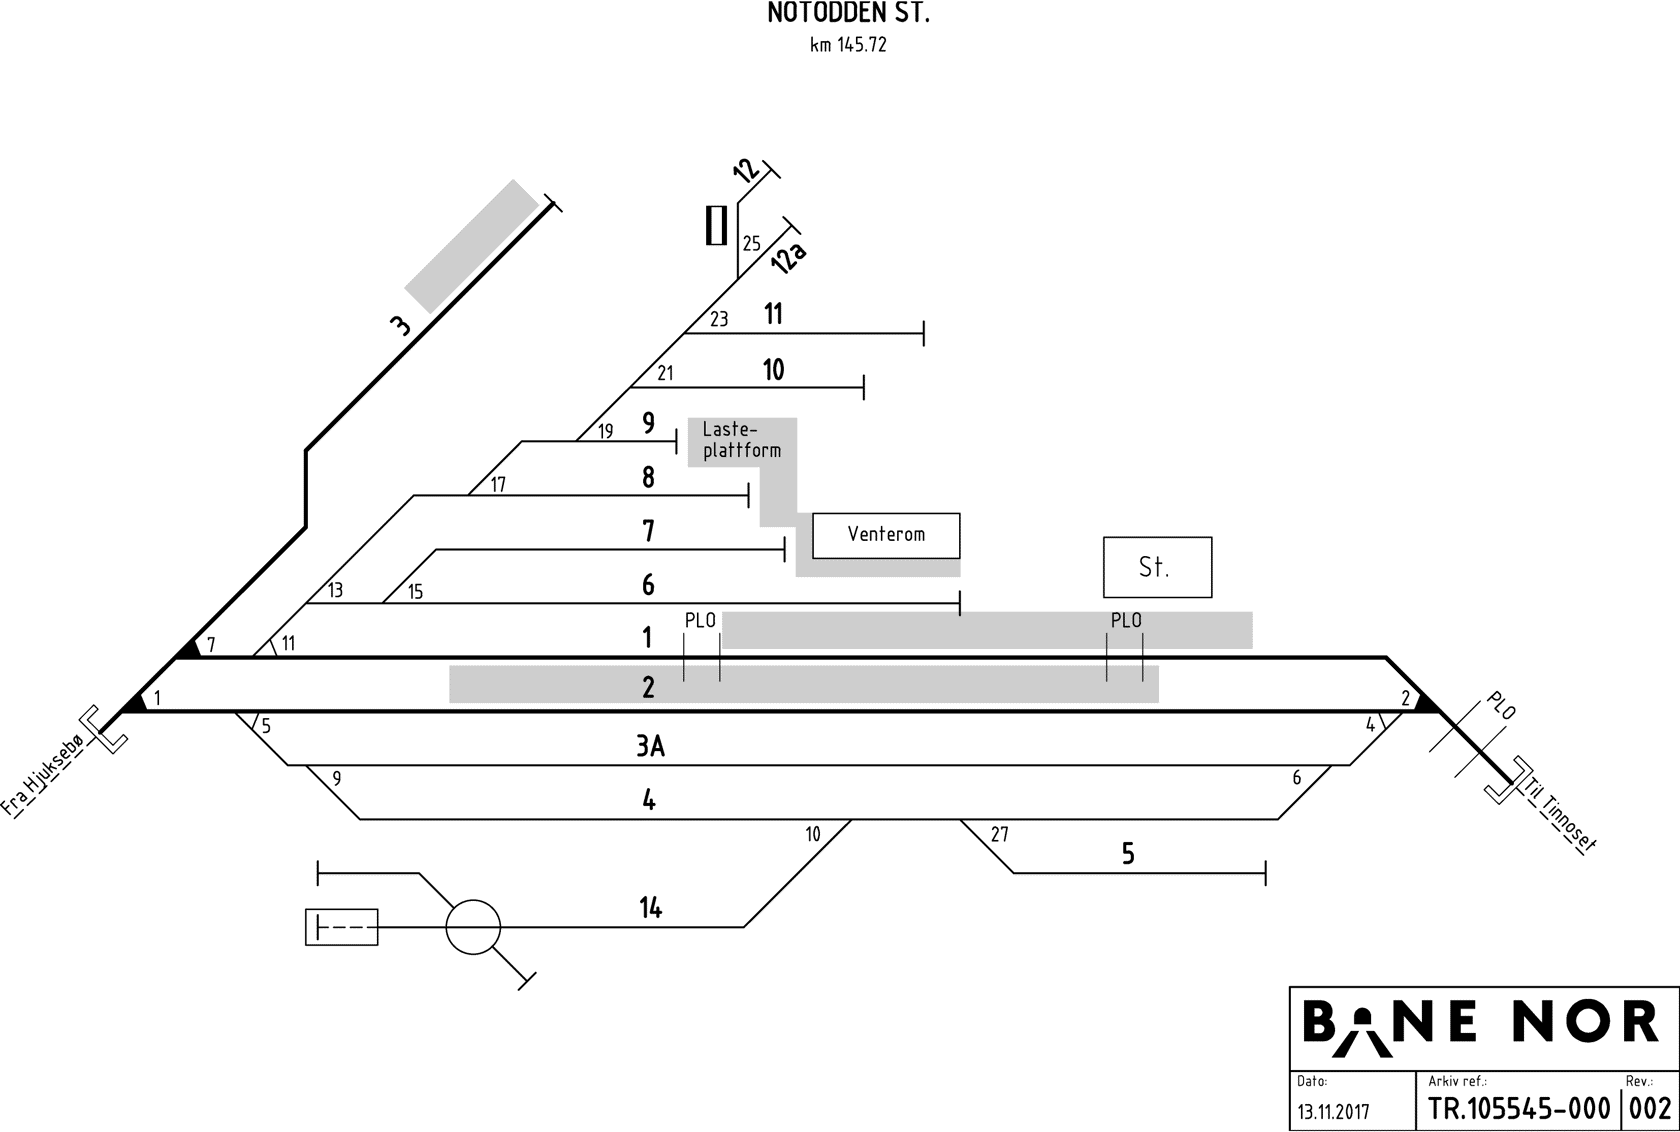 Track plan Notodden Stabling Facility